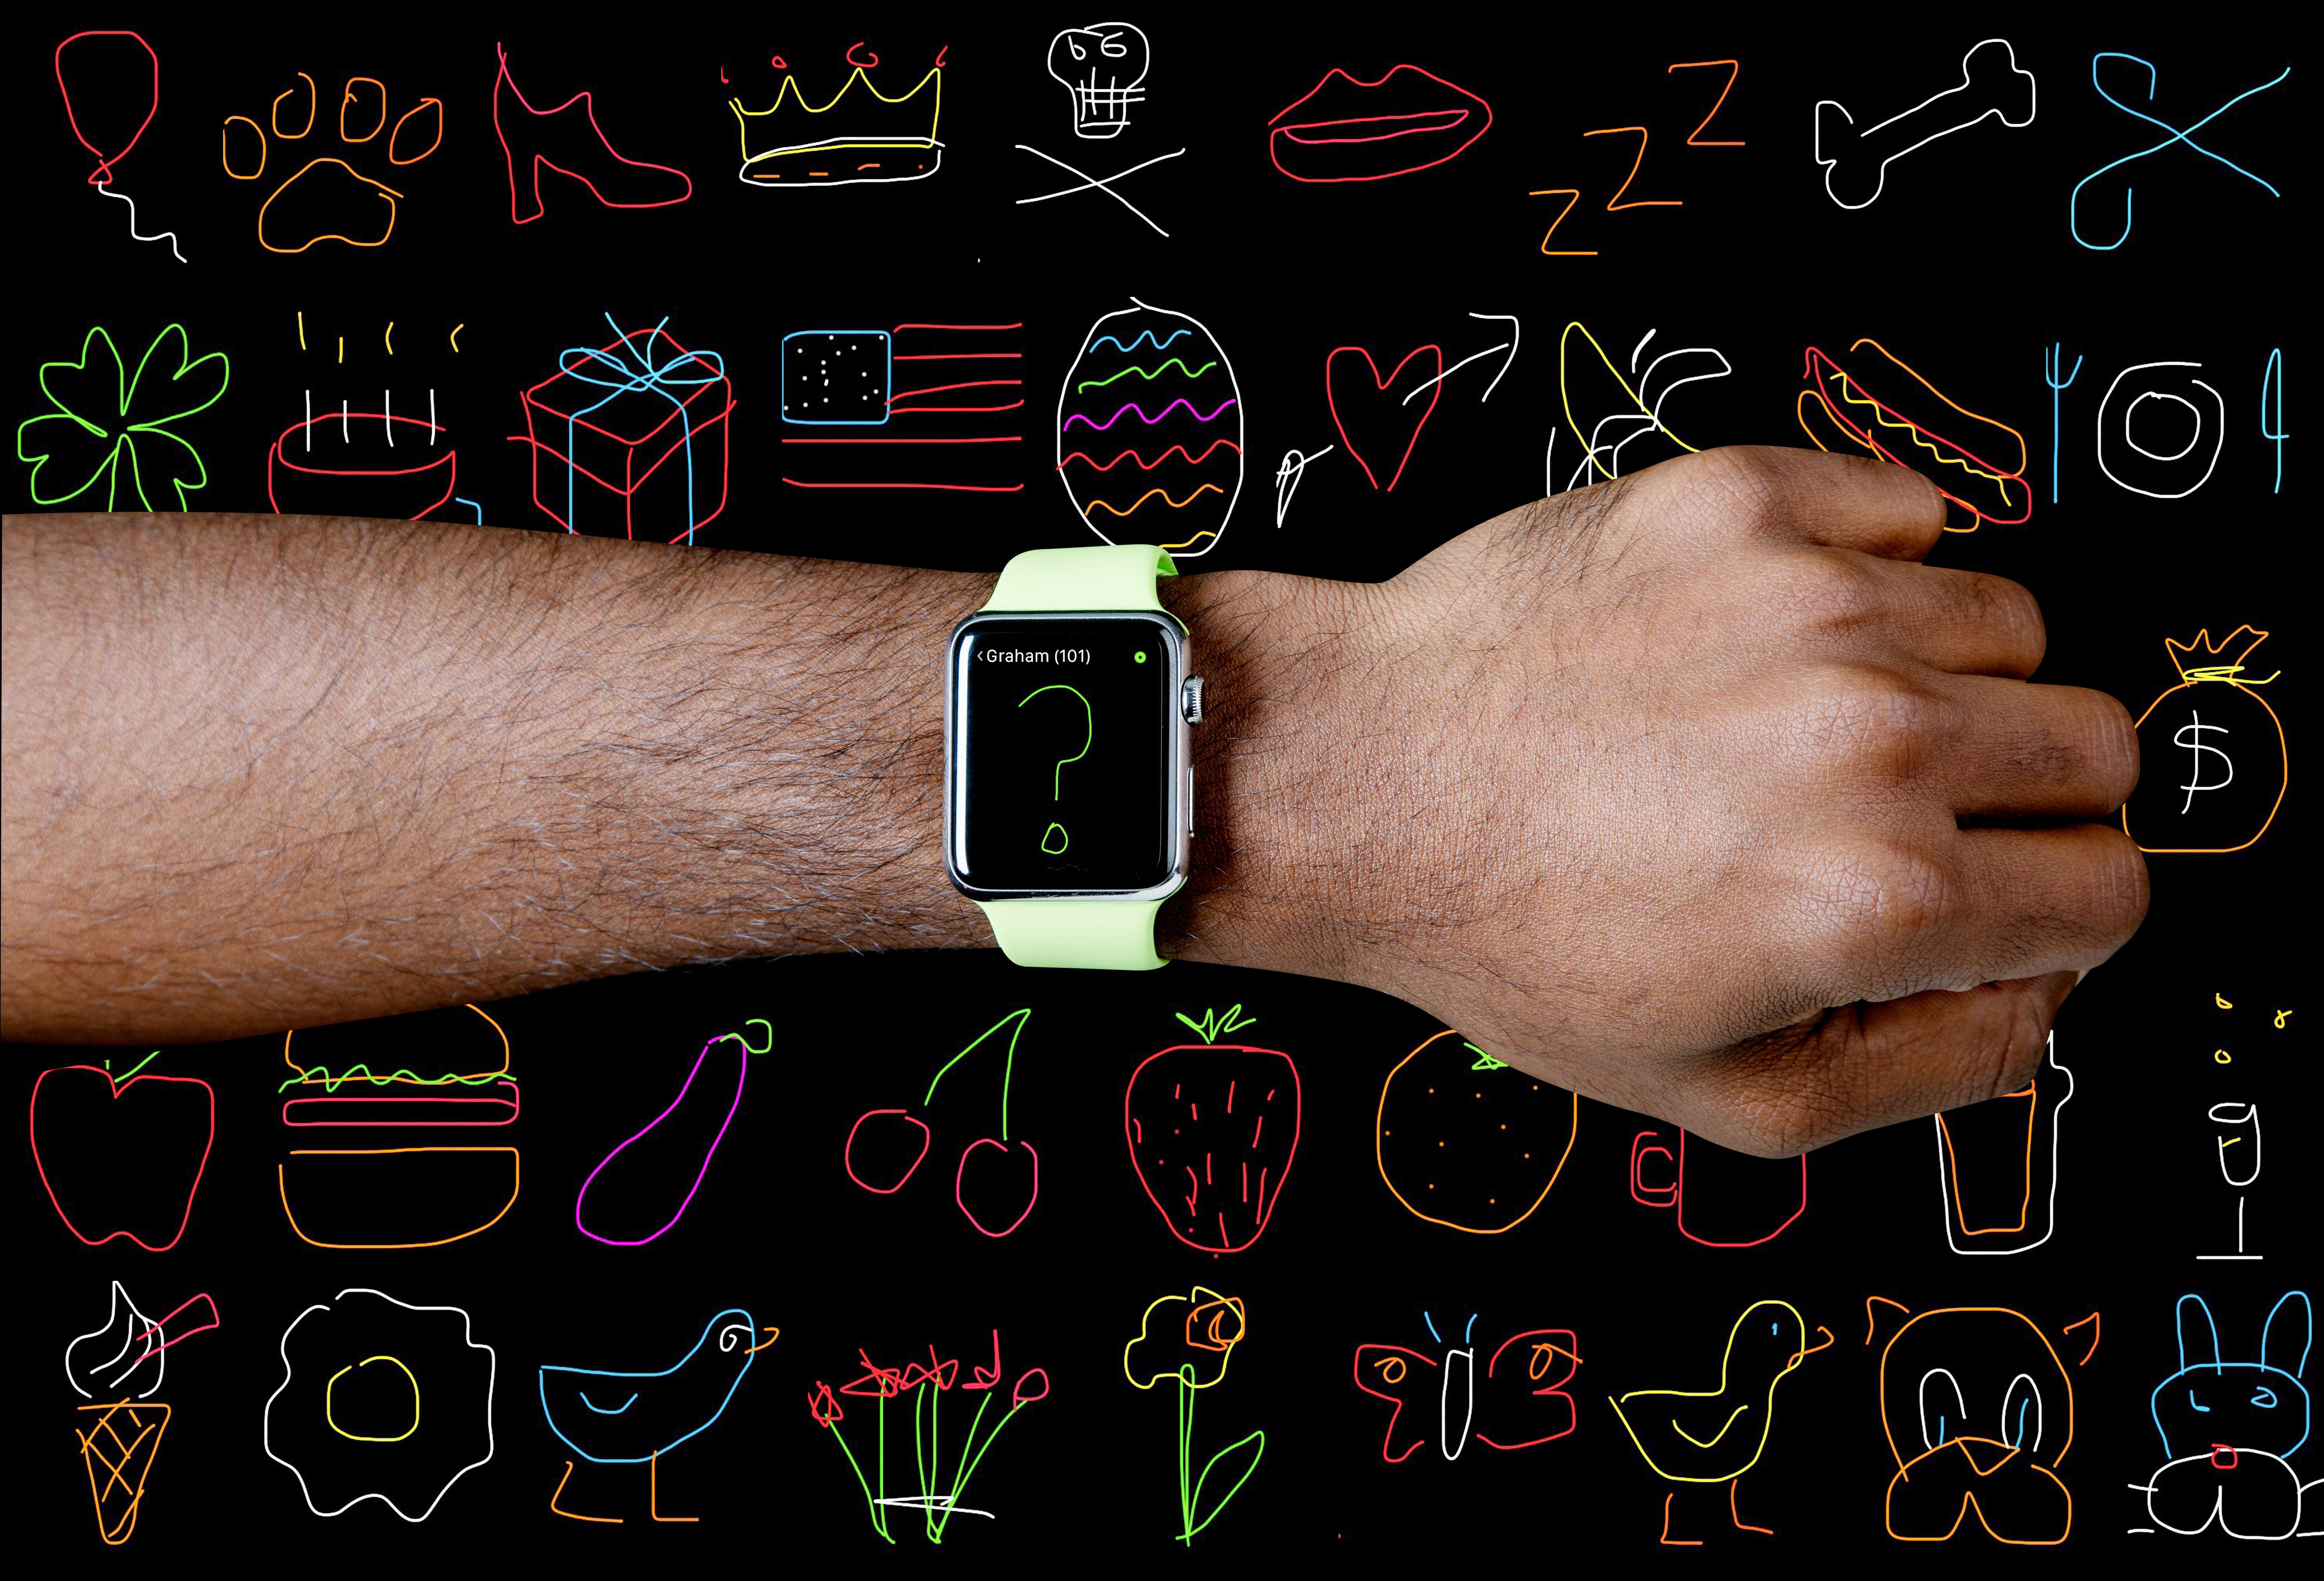 Learn to draw like Leonardo with Apple Watch Digital Touch Sketches